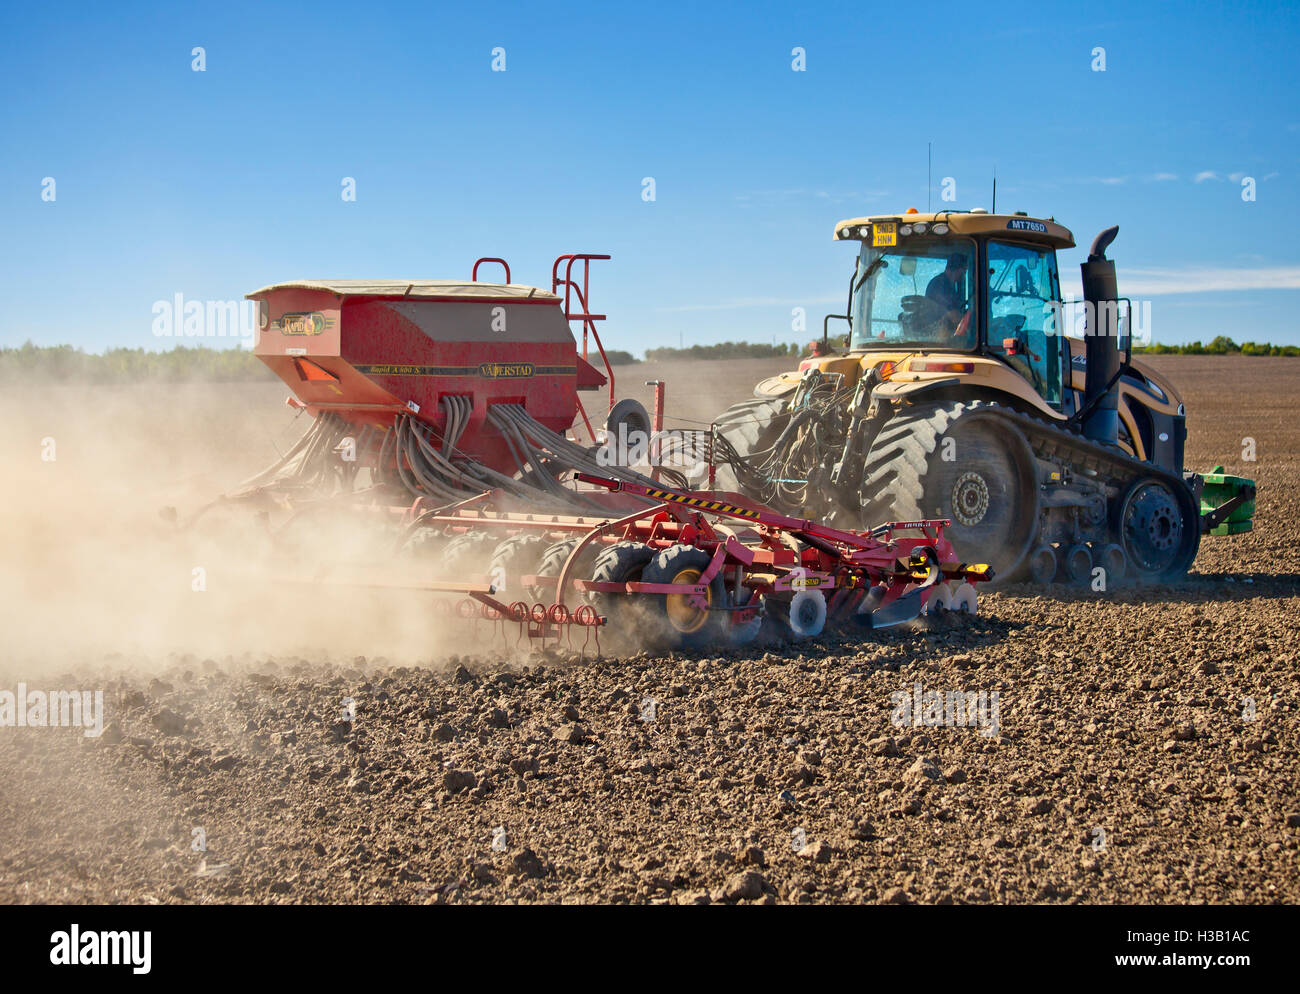 Tractor sowing seed. Stock Photo